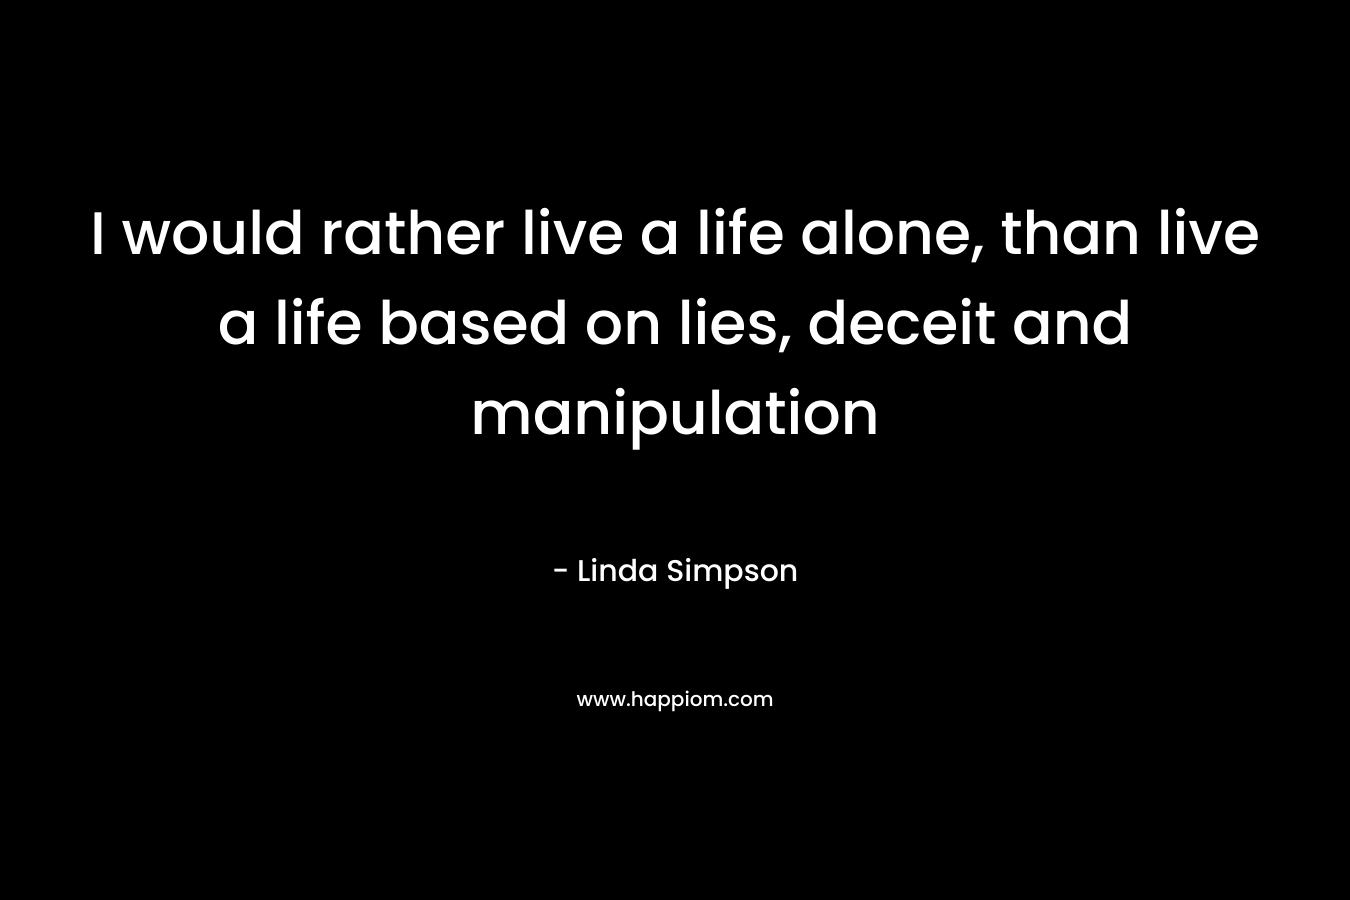 I would rather live a life alone, than live a life based on lies, deceit and manipulation – Linda Simpson